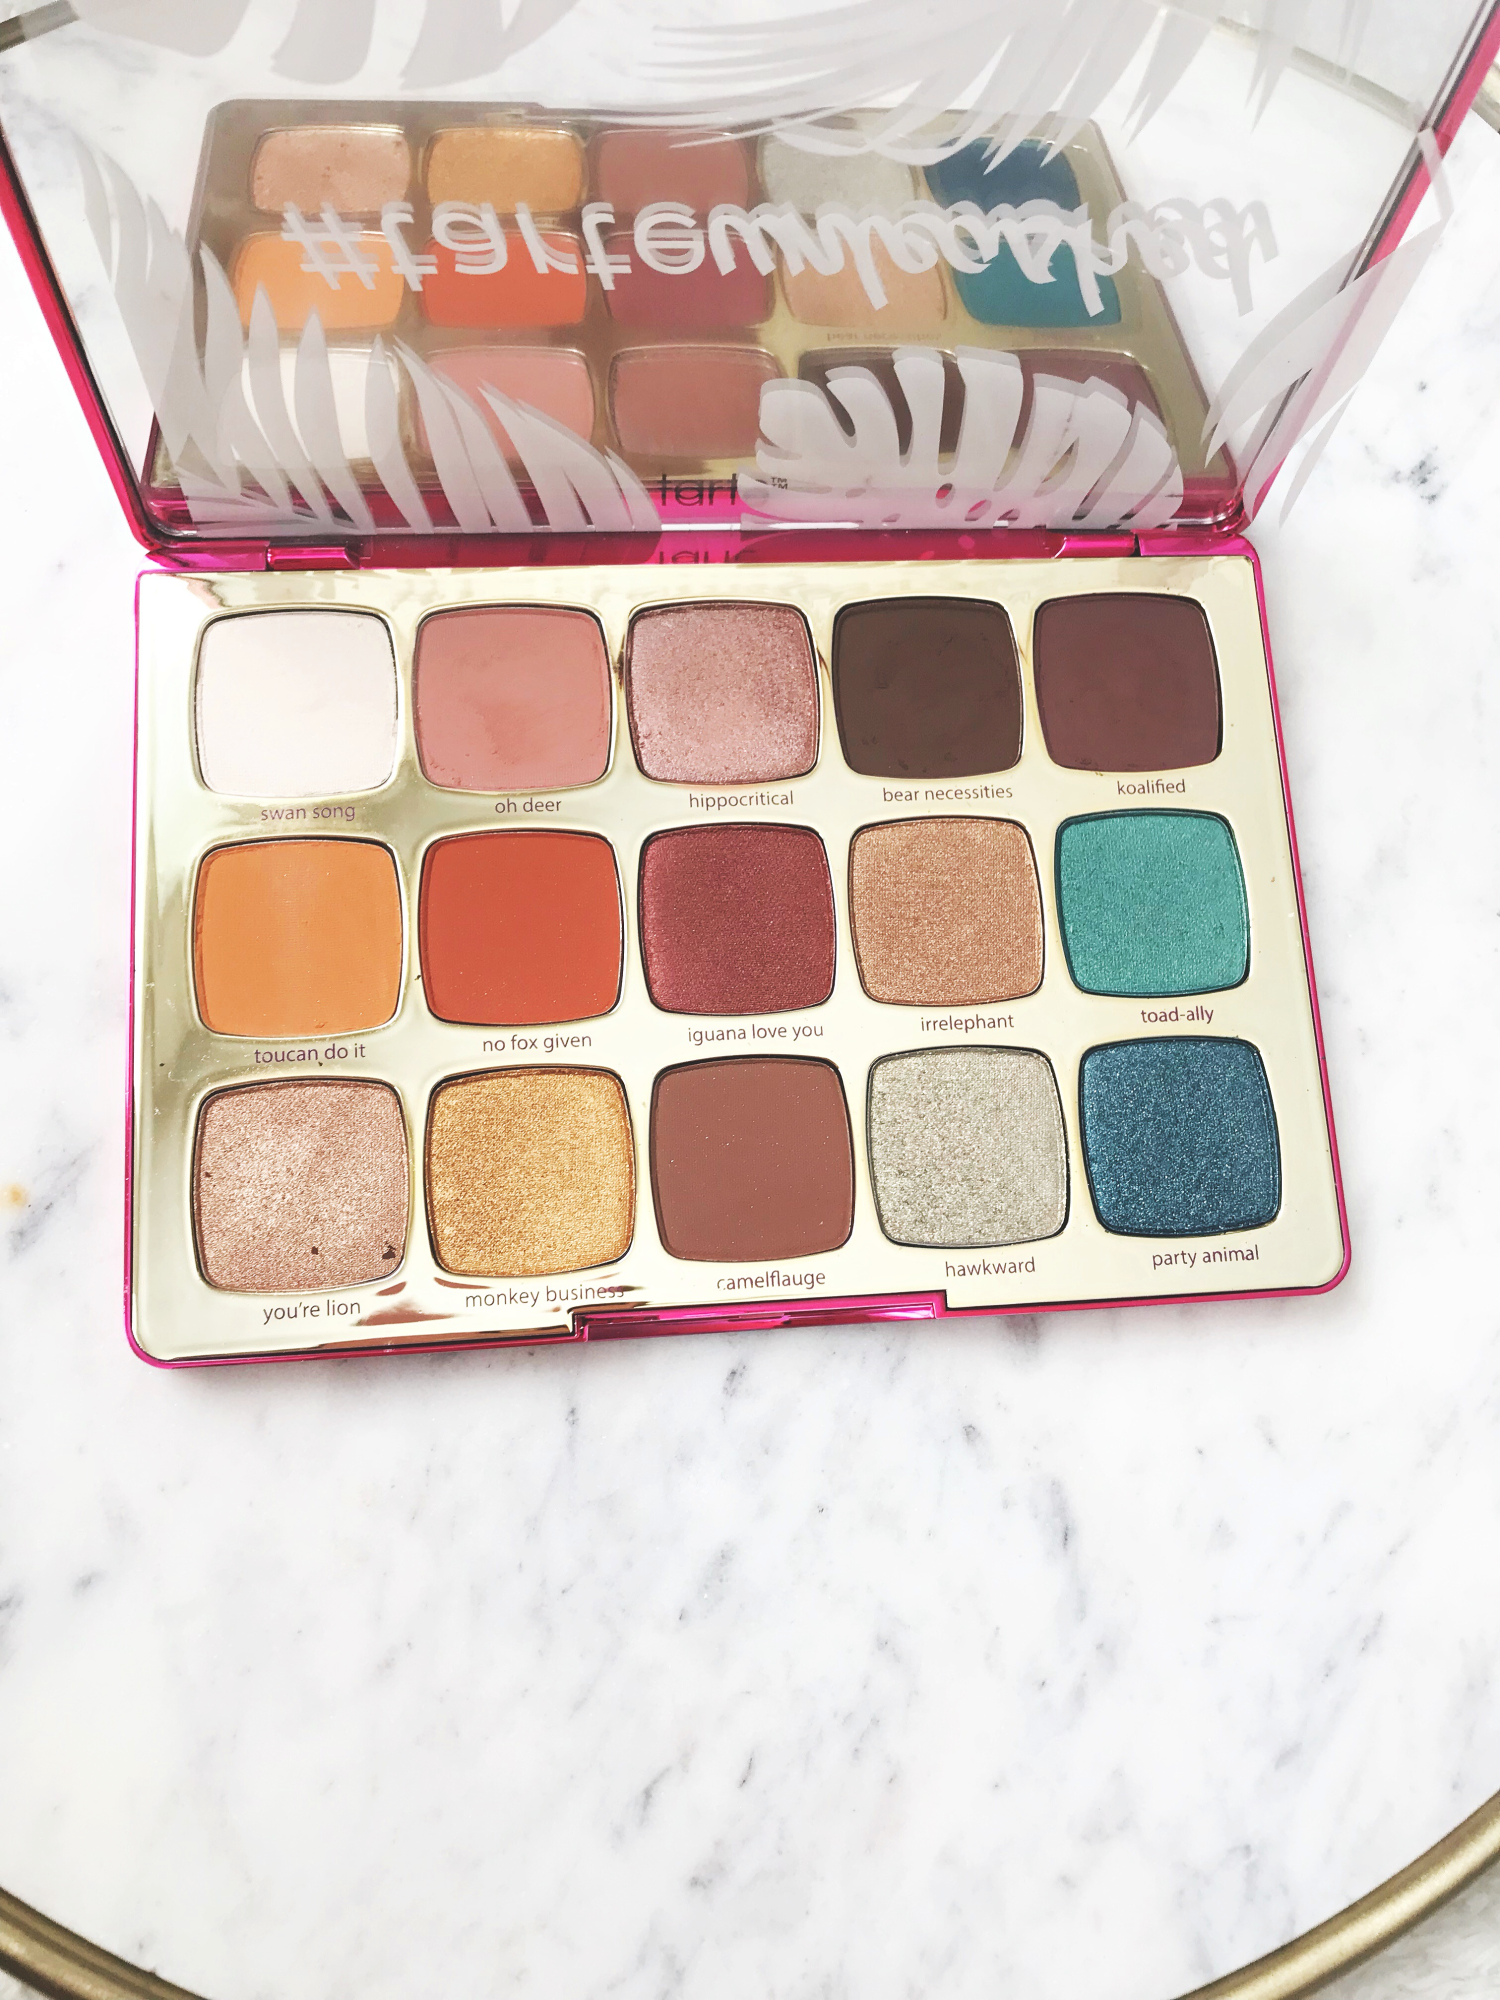 STH August 2019 Monthly Favorites-Tarte Unleashed Palette